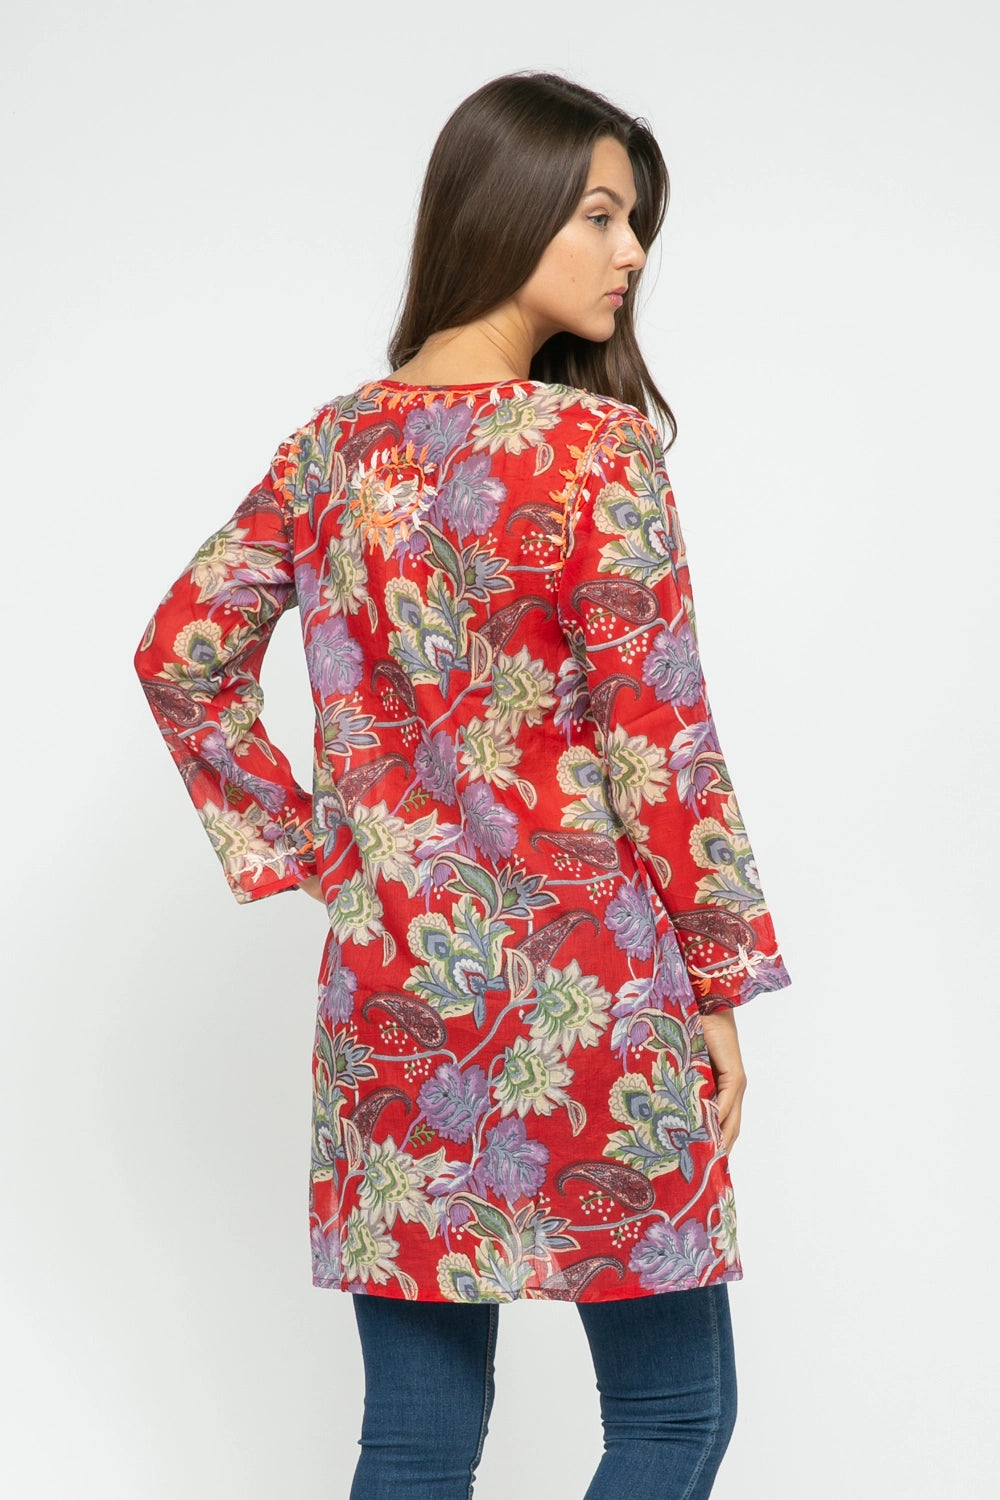 Carlyle Red Printed Embroidered Tunic